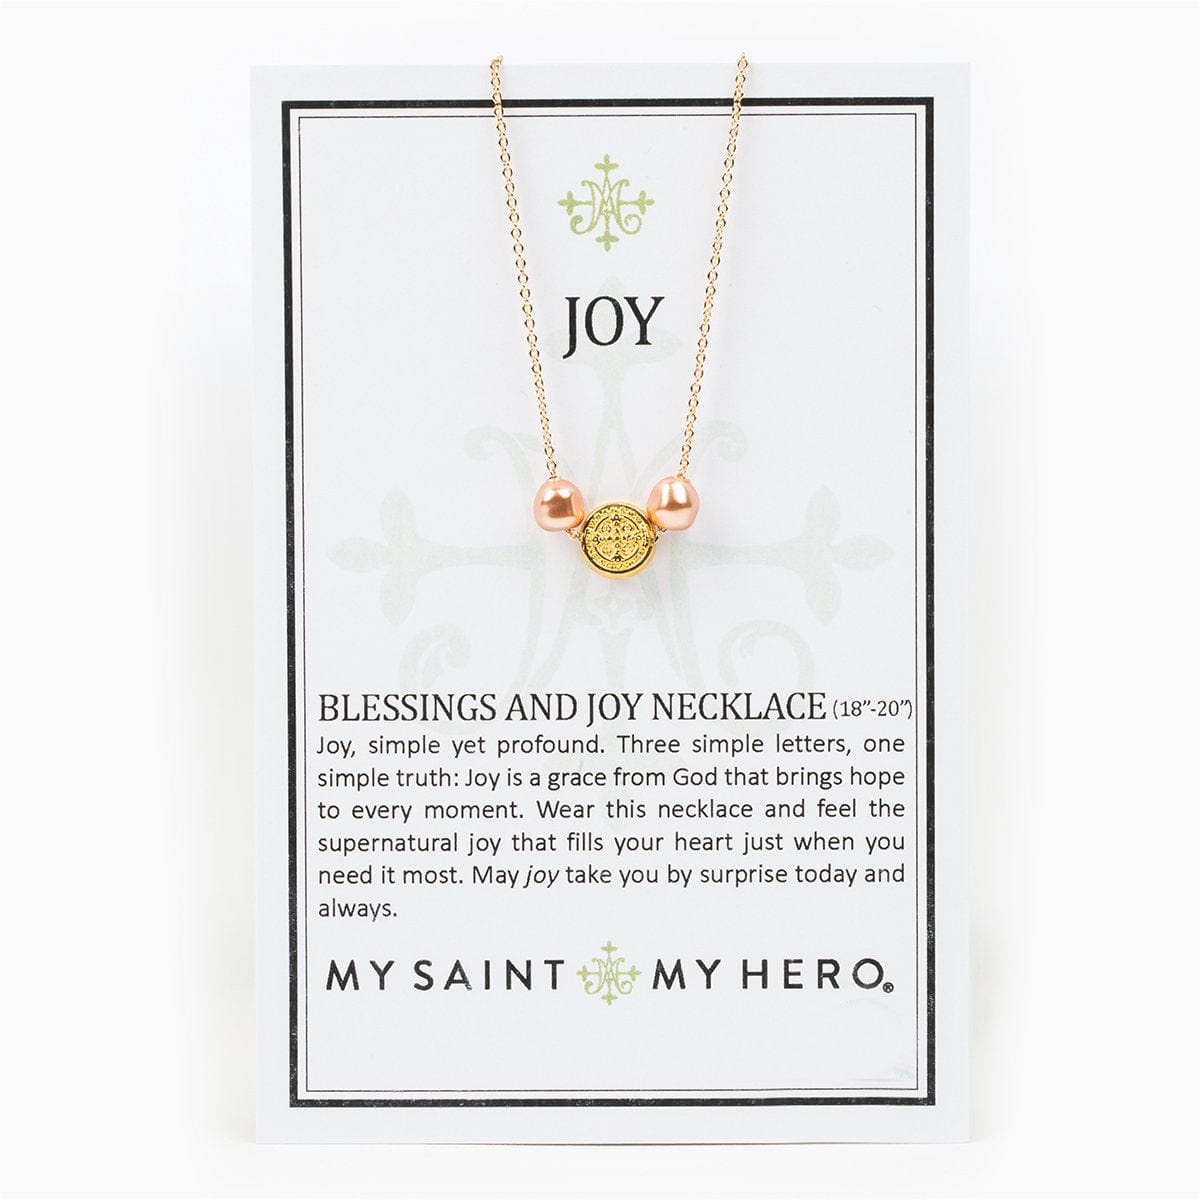 My Saint My Hero My Saint My Hero Blessings and Joy Necklace Platinum Pearl - Little Miss Muffin Children & Home